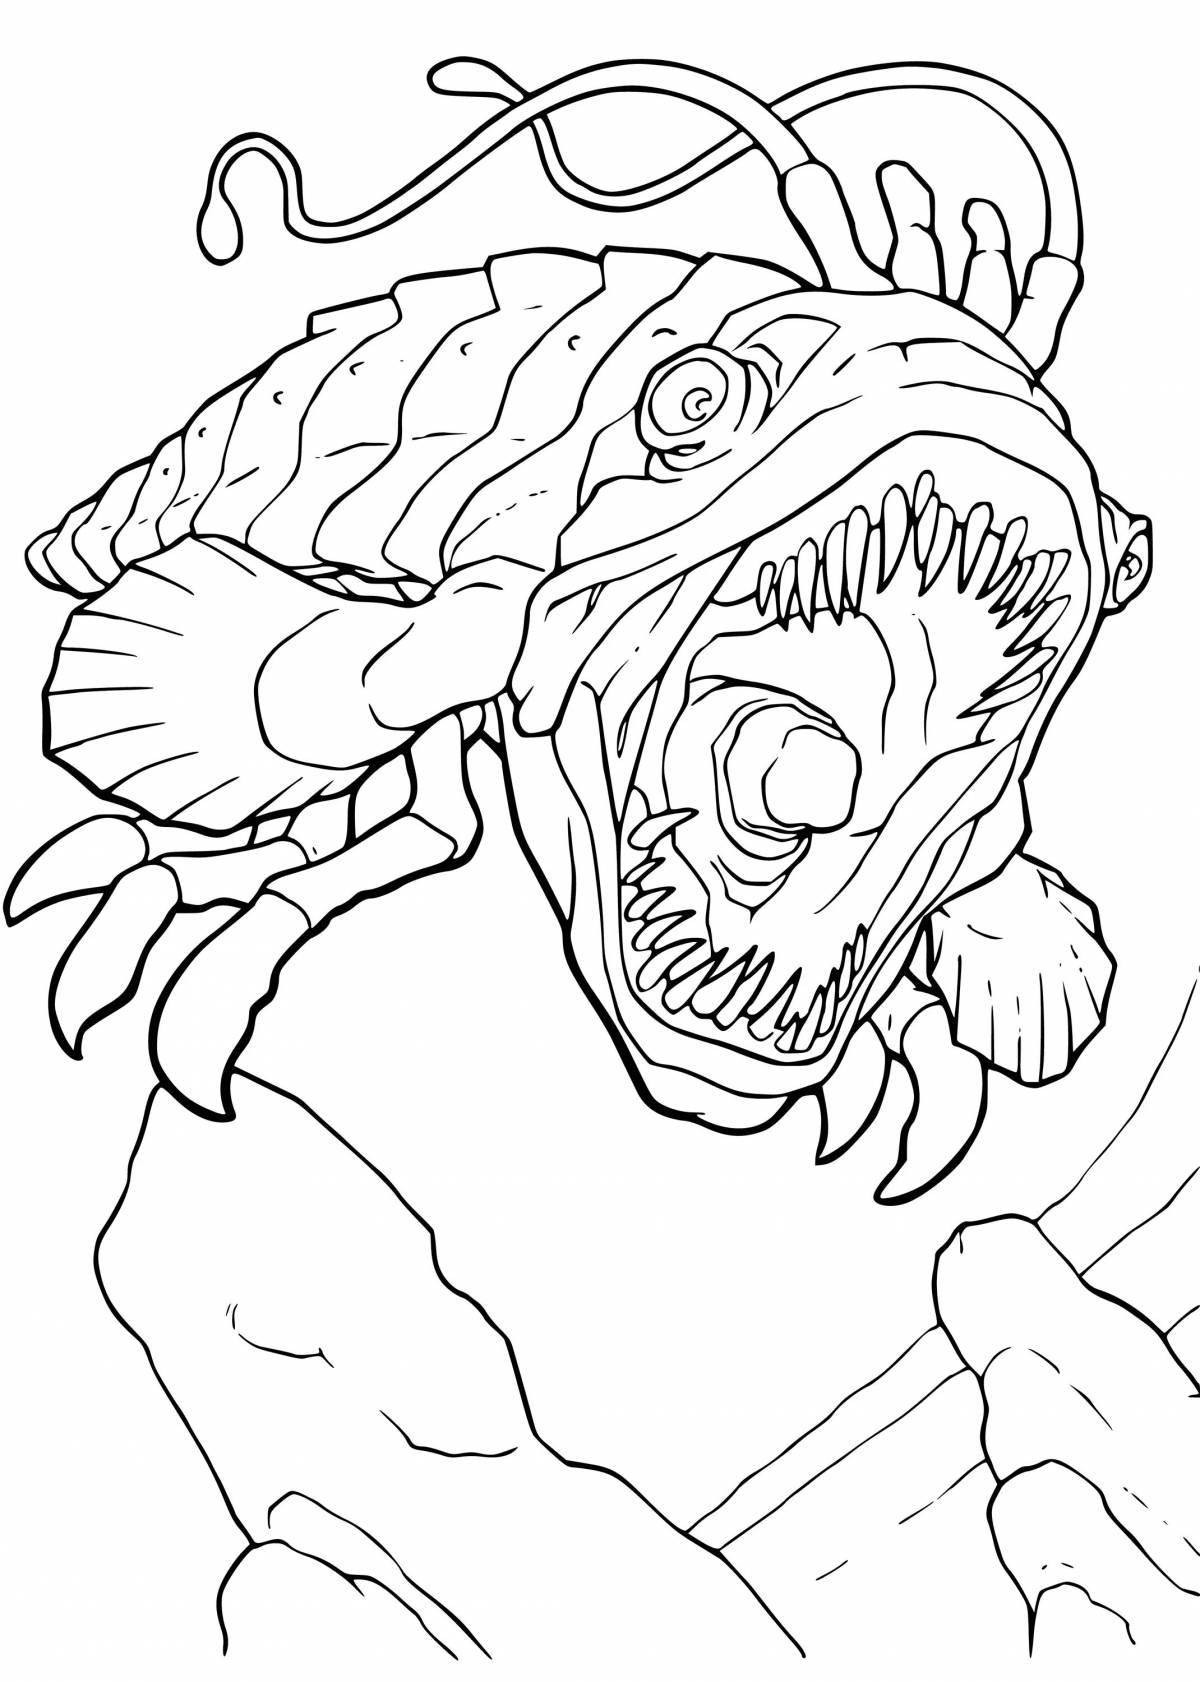 Spooky monster coloring book